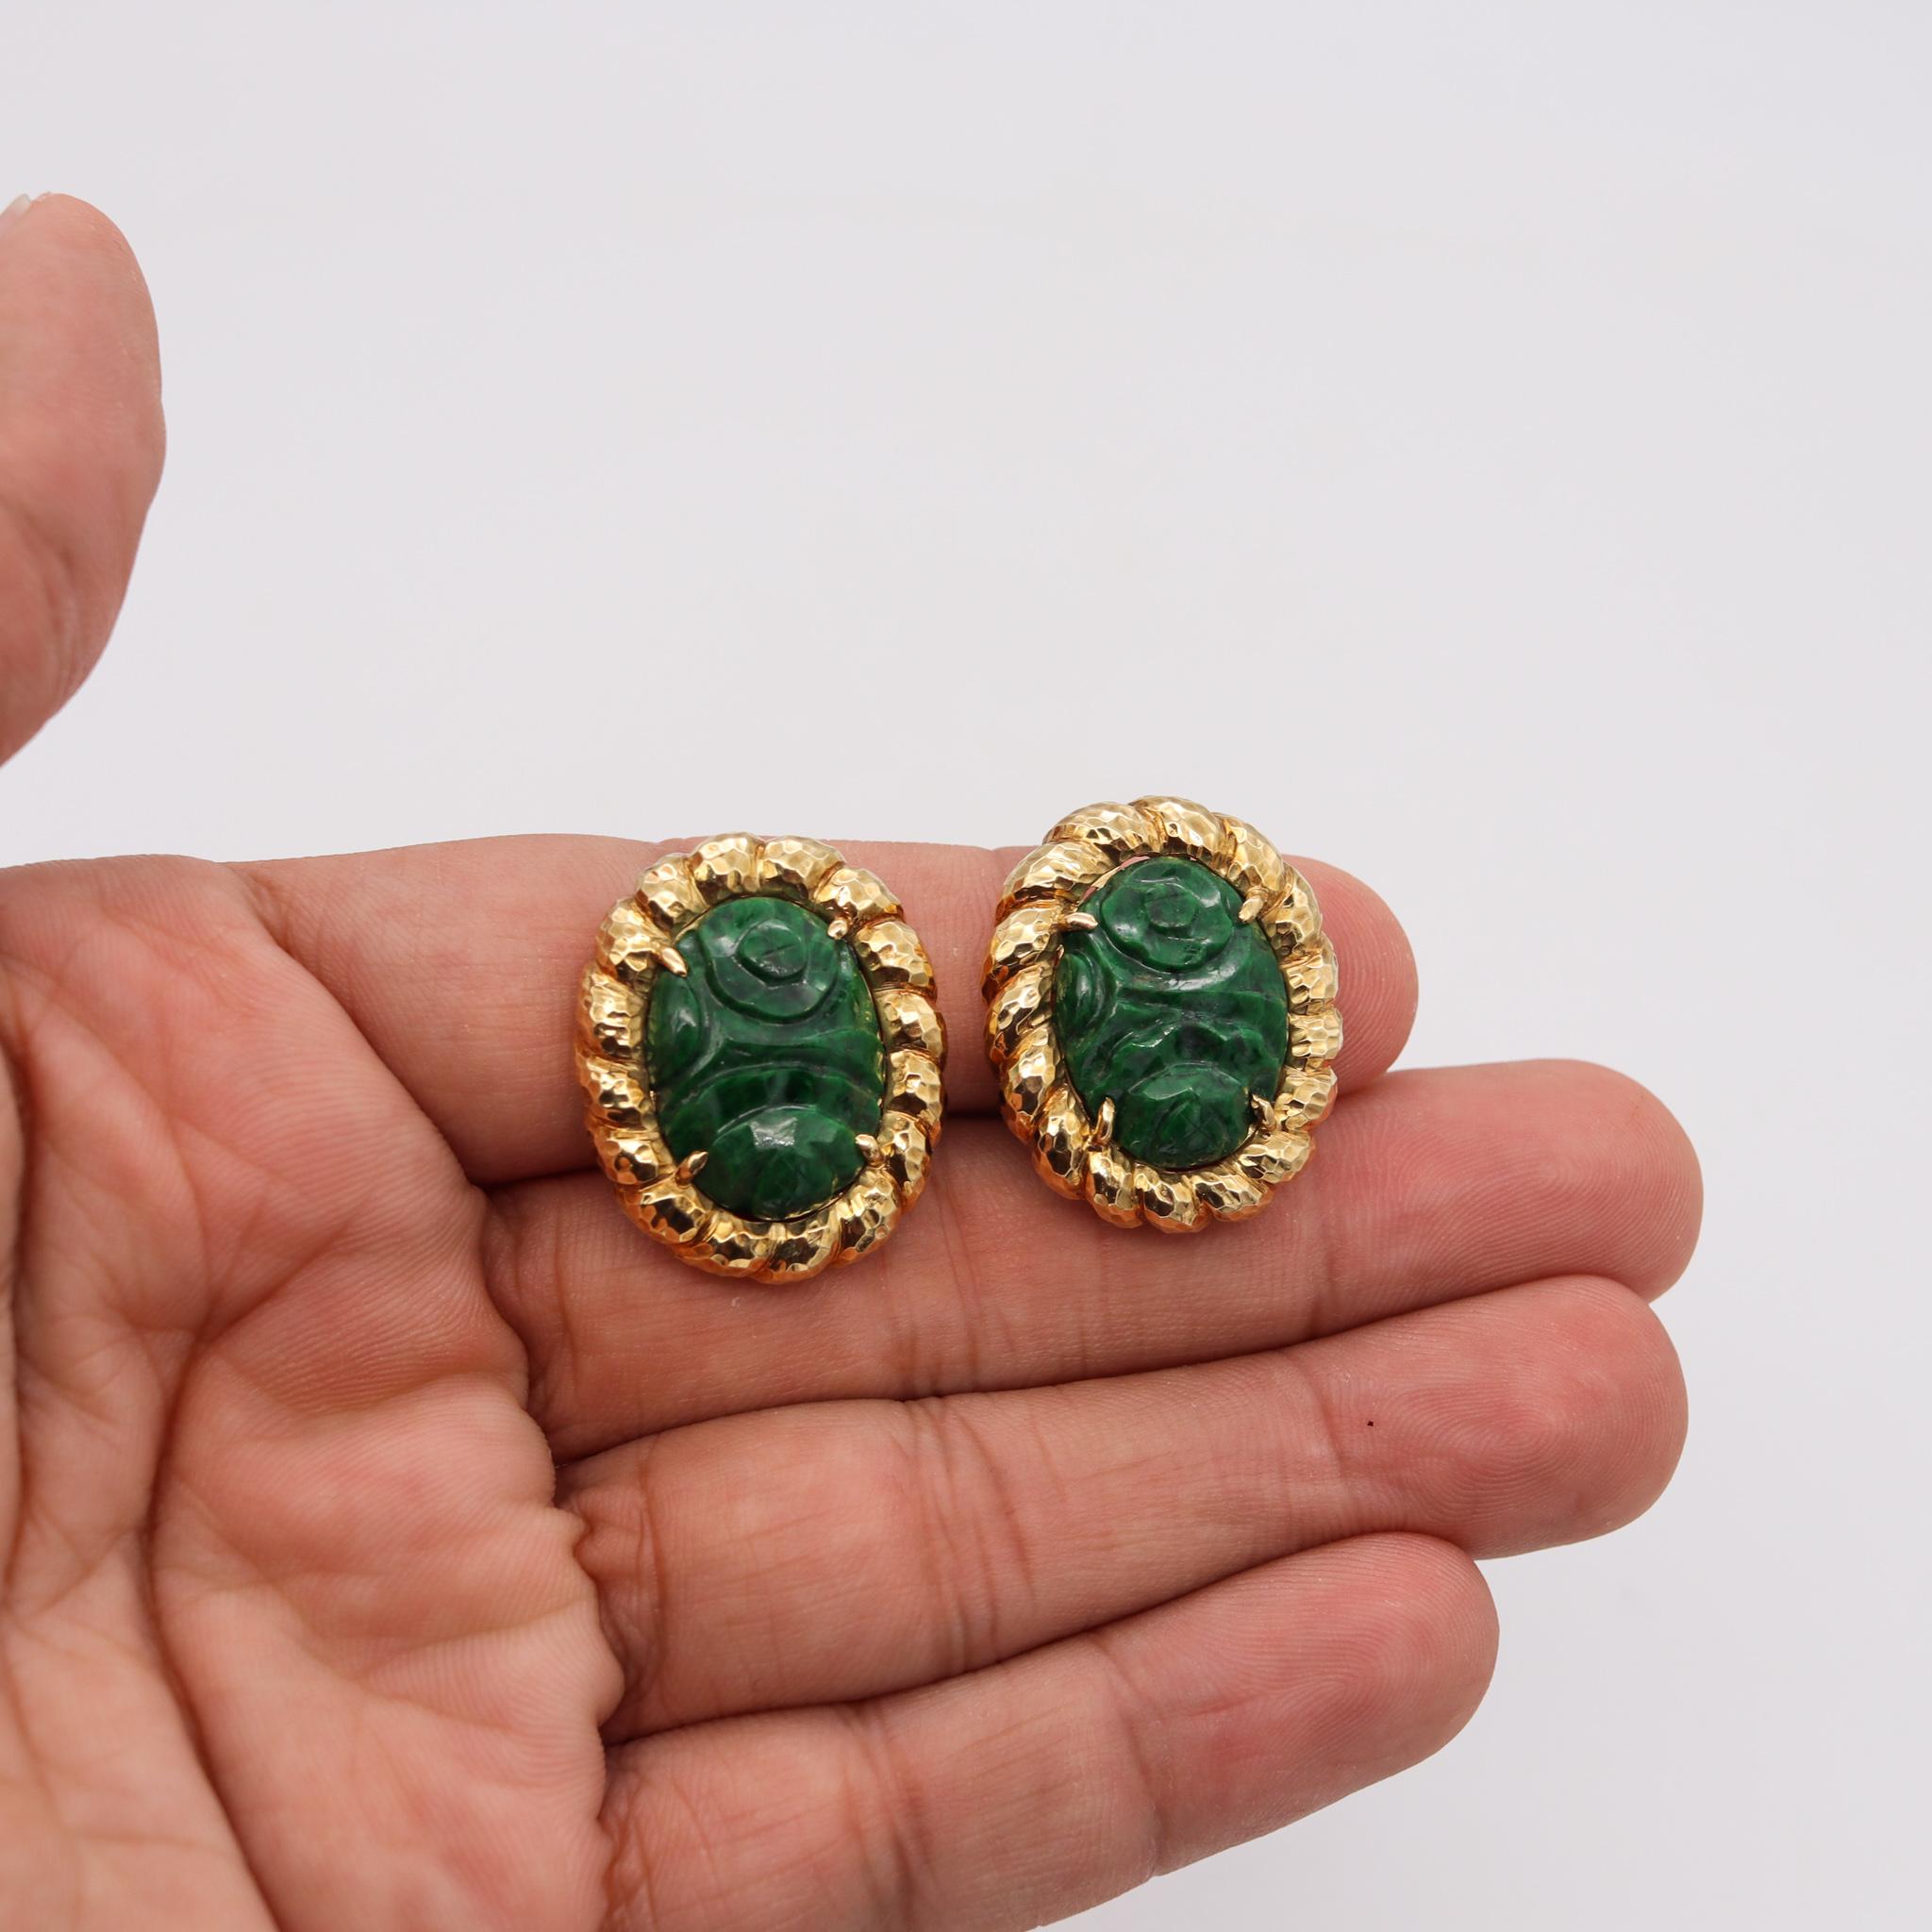 Women's Modernist 1970 Clip-On Earrings in 18Kt Yellow Gold 24.30 Ctw Maw Sit Sit Jade For Sale